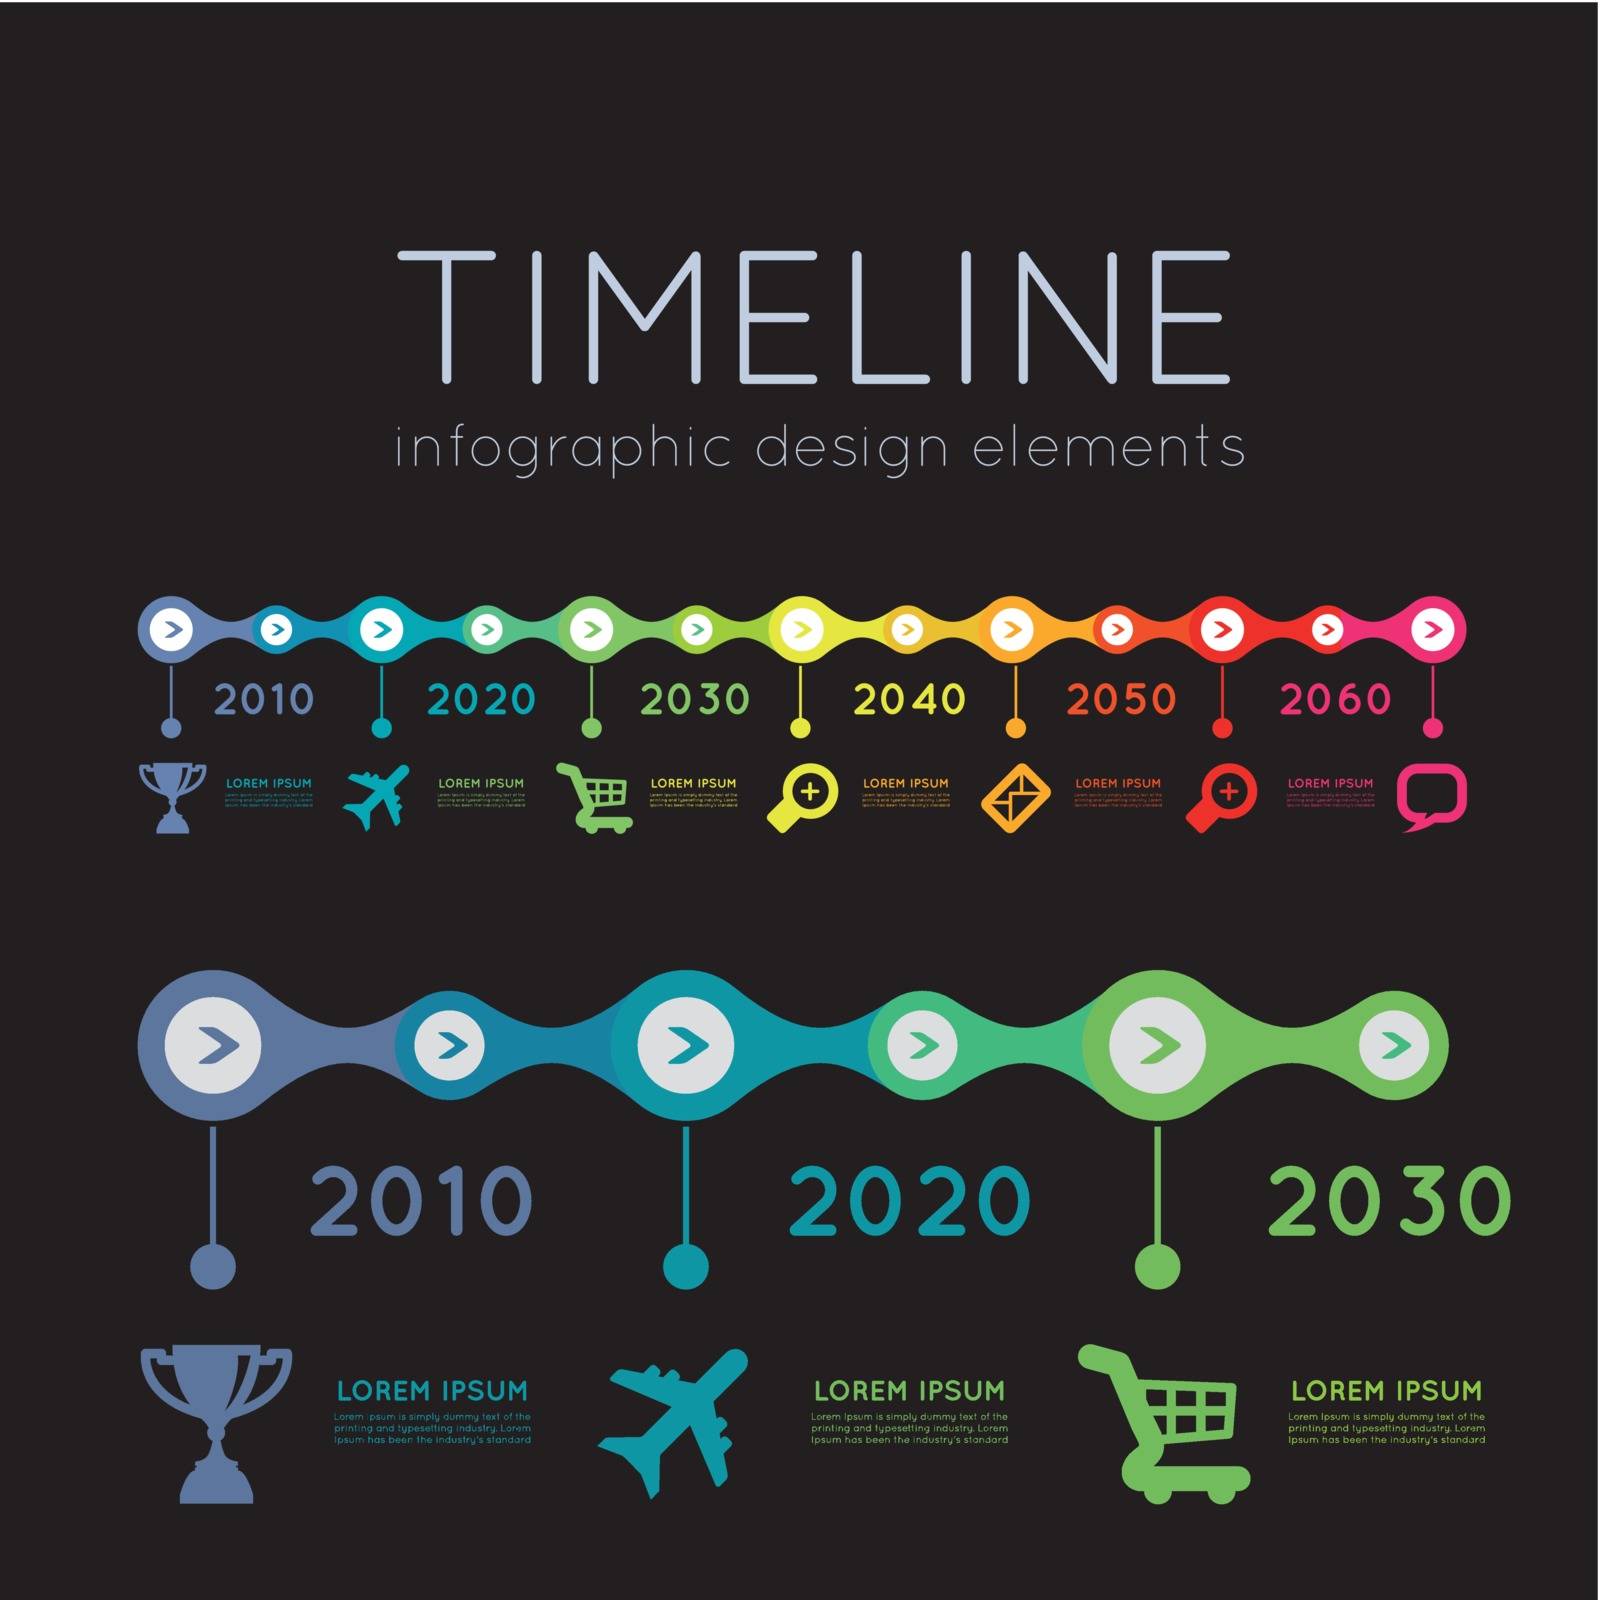 Timeline infographic by sermax55